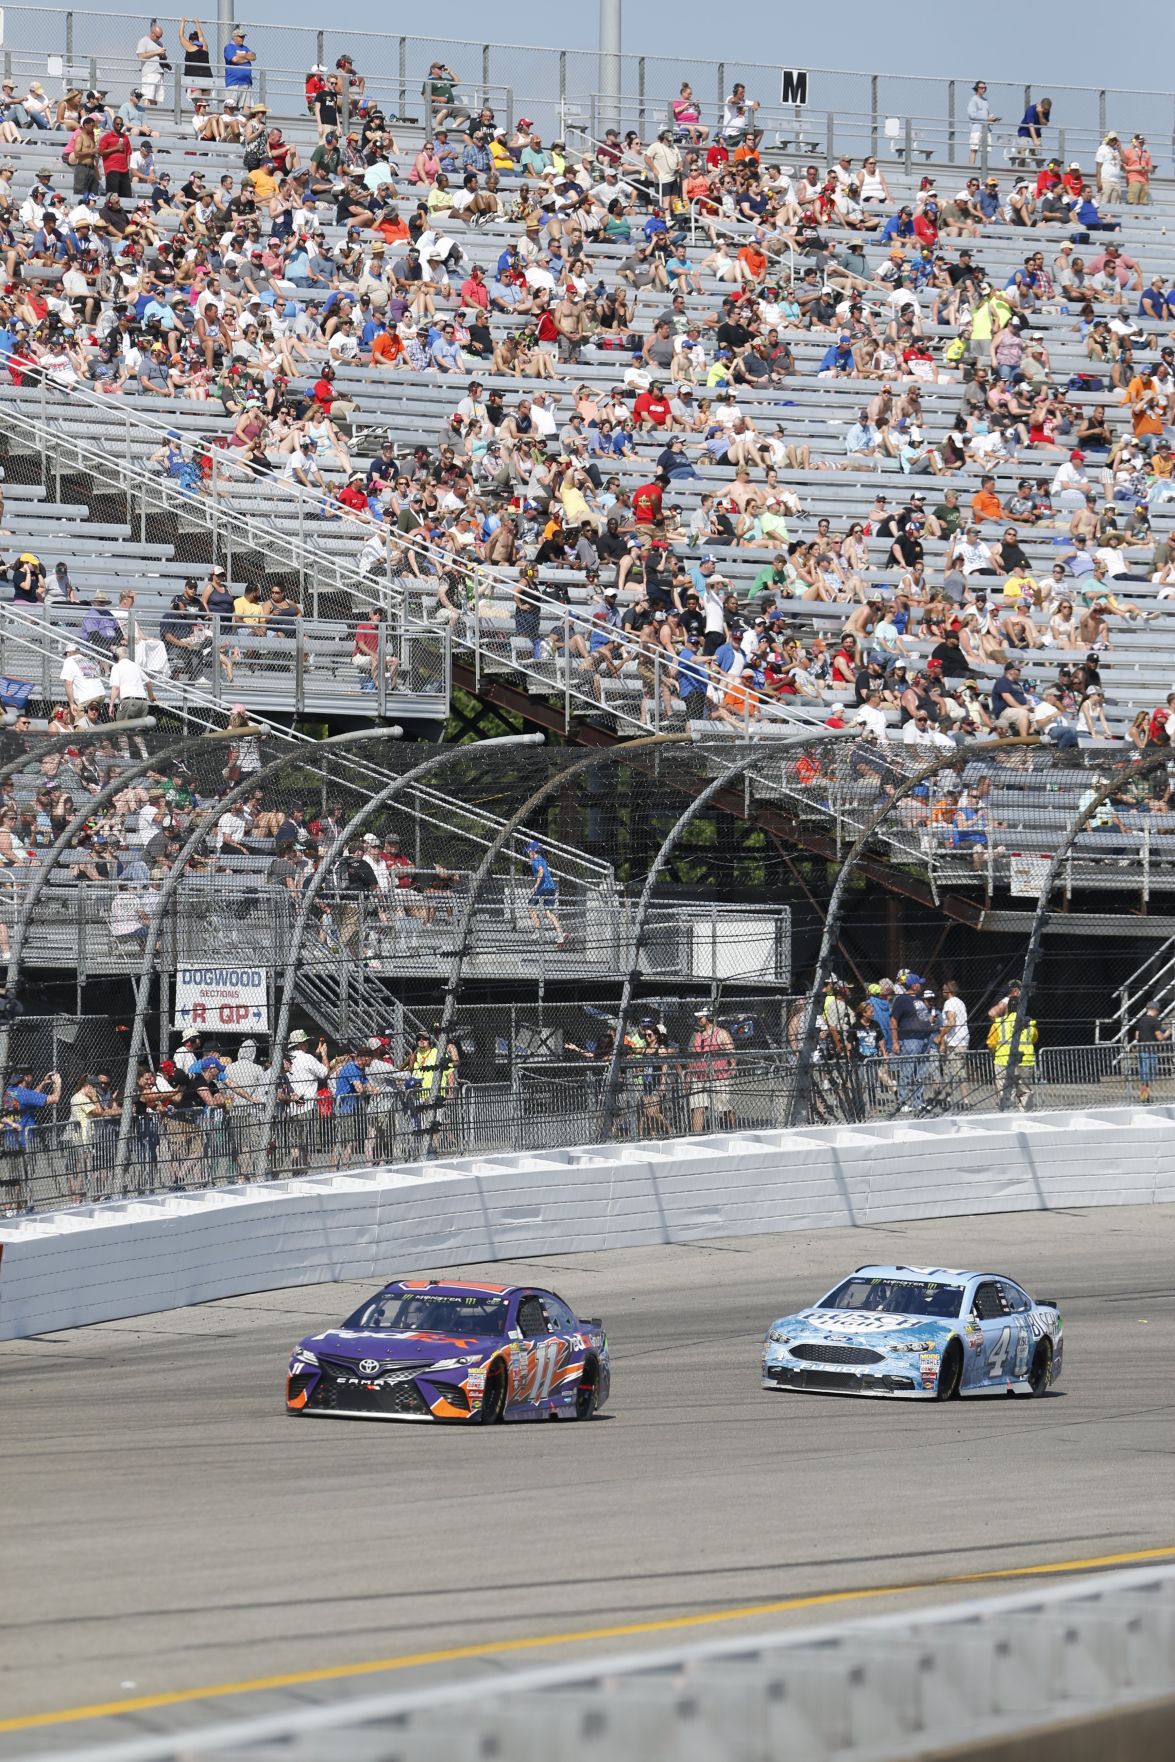 NASCAR race at Richmond that sold 112,000 tickets a decade ago is ...